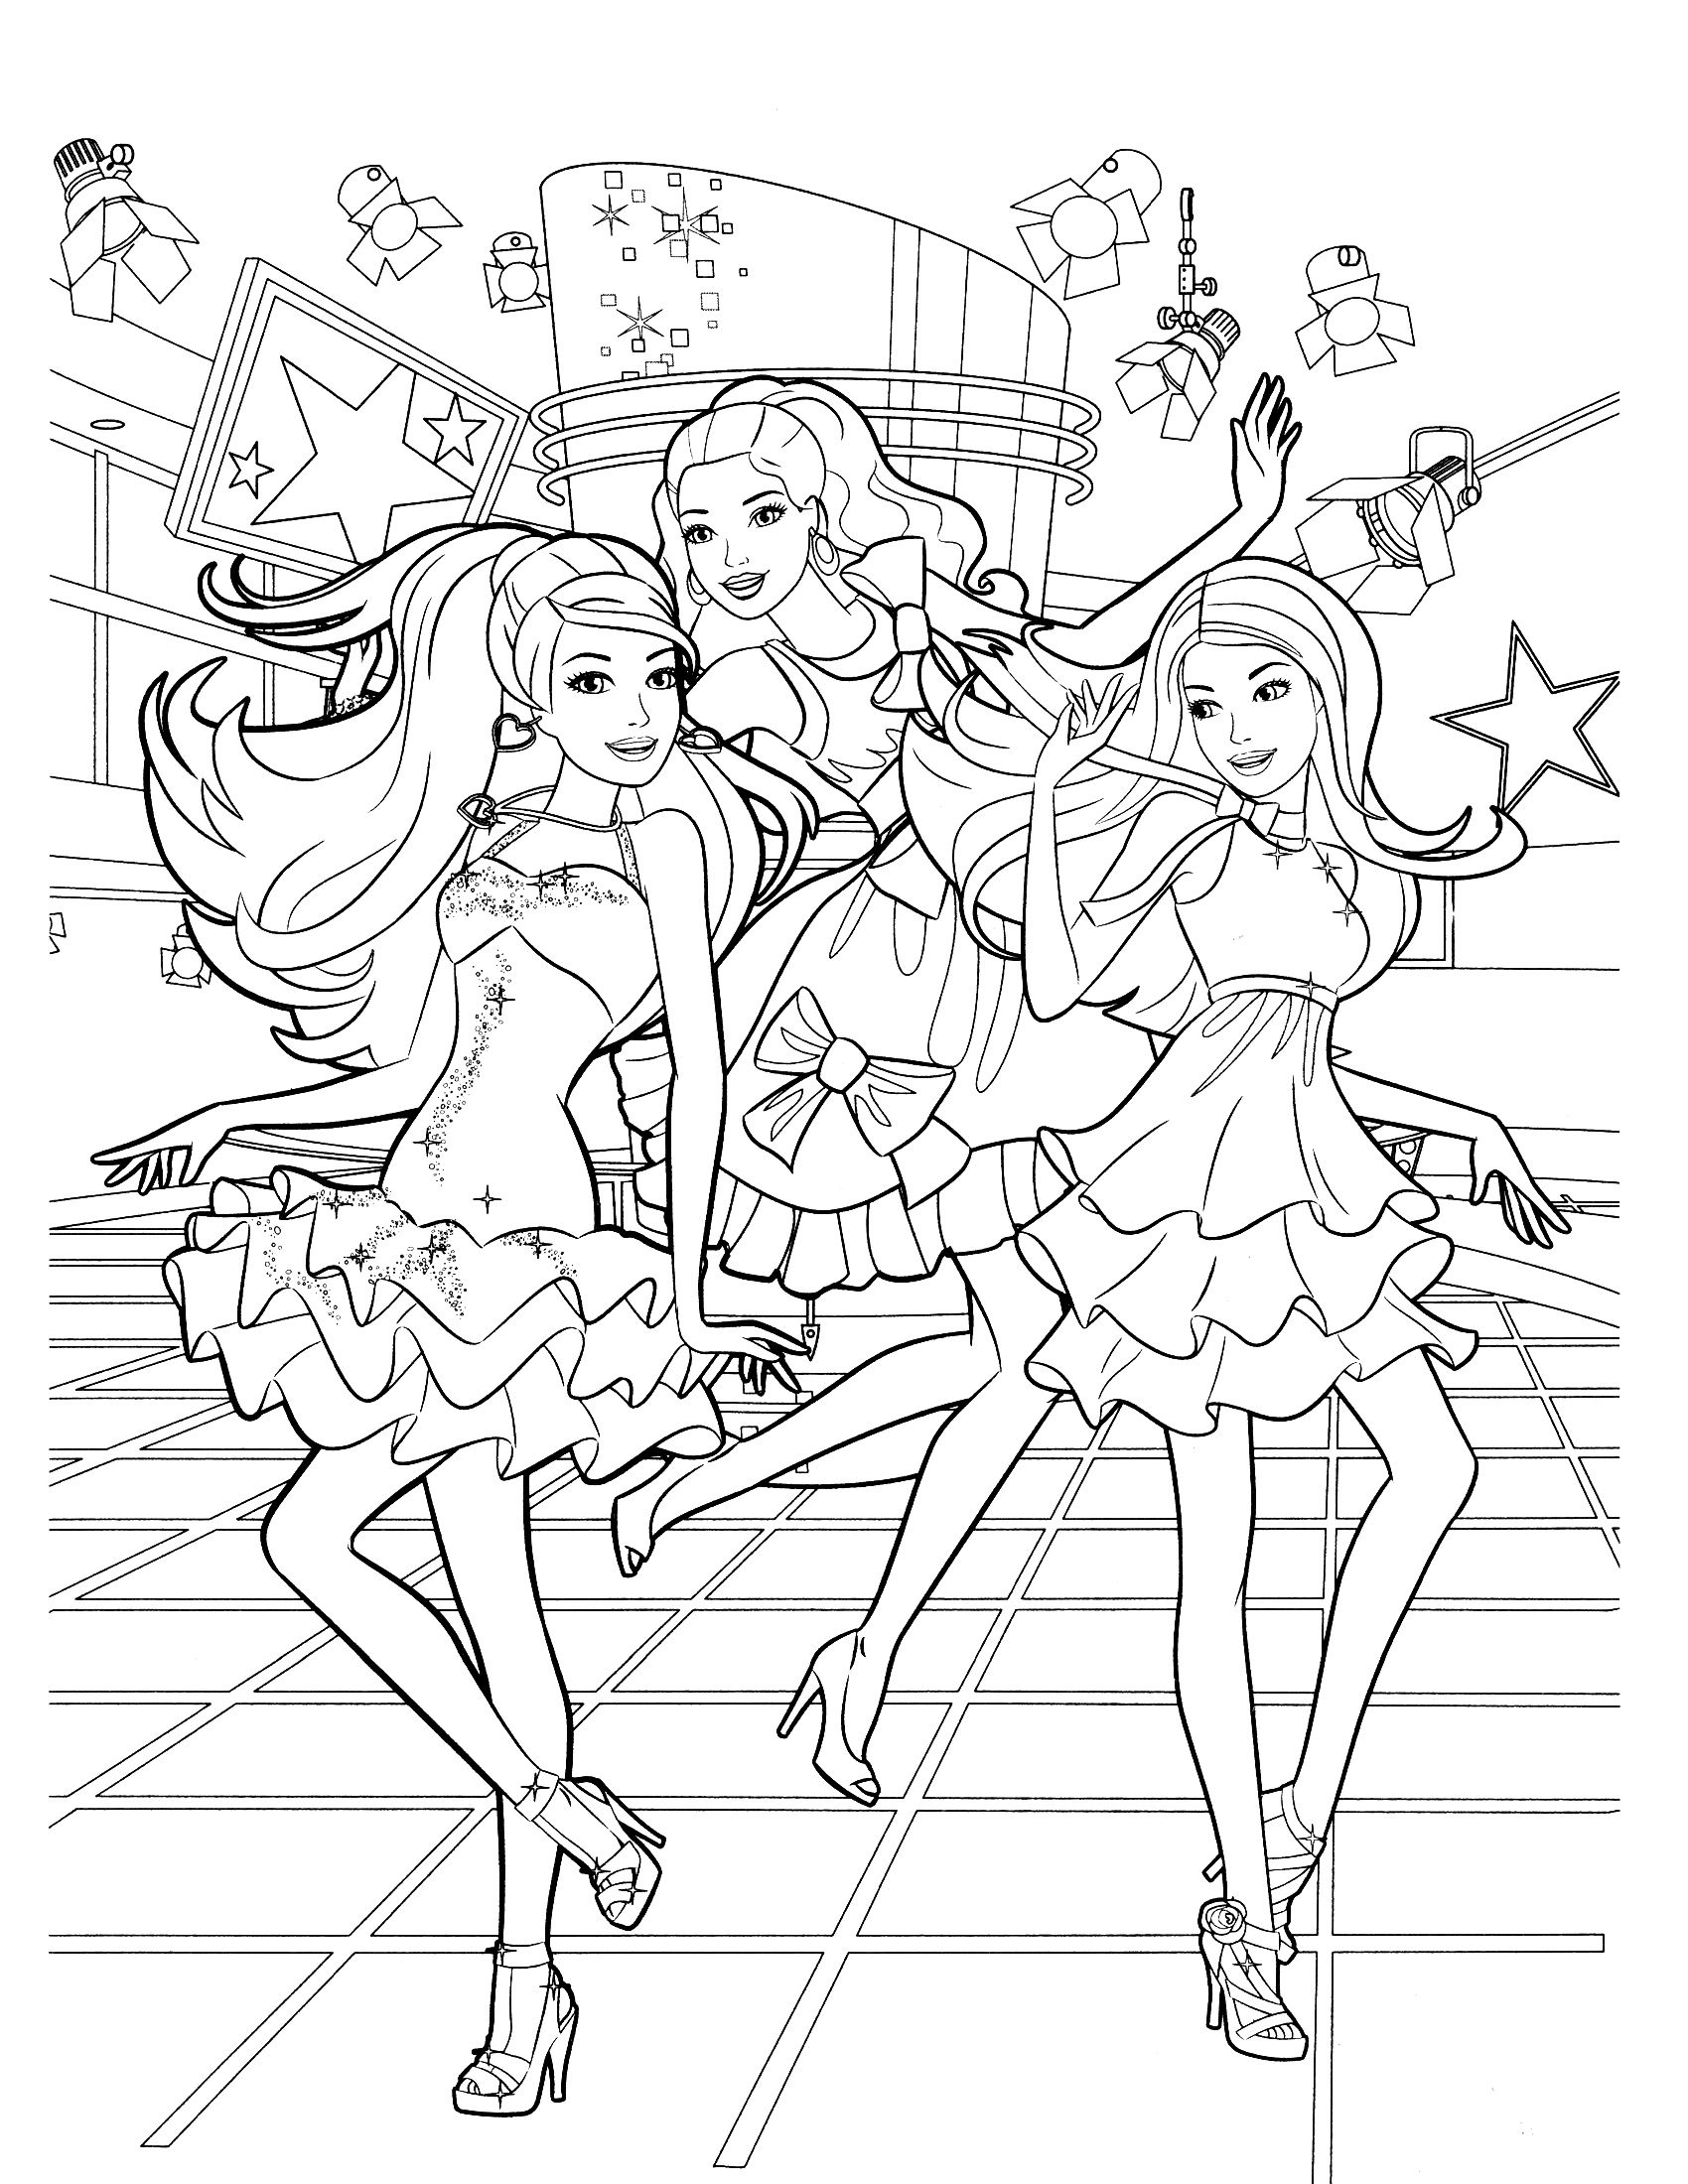 Printable Barbie And Friends Coloring Pages Pdf - Barbie And Friends Coloring Book